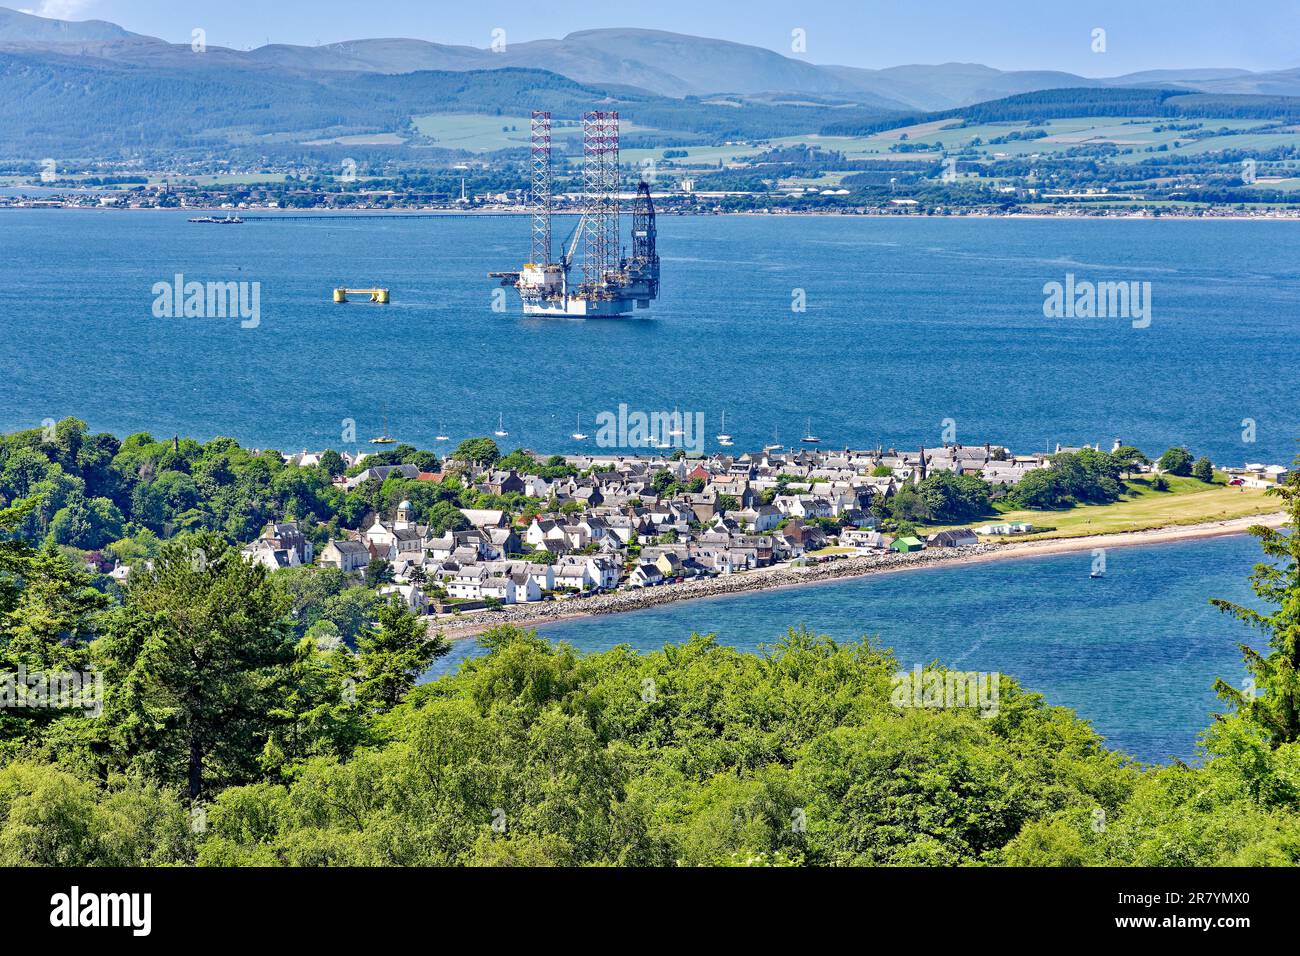 Cromarty Scotland Cromarty Firth view over the town and housesr towards the hills in early summer Stock Photo